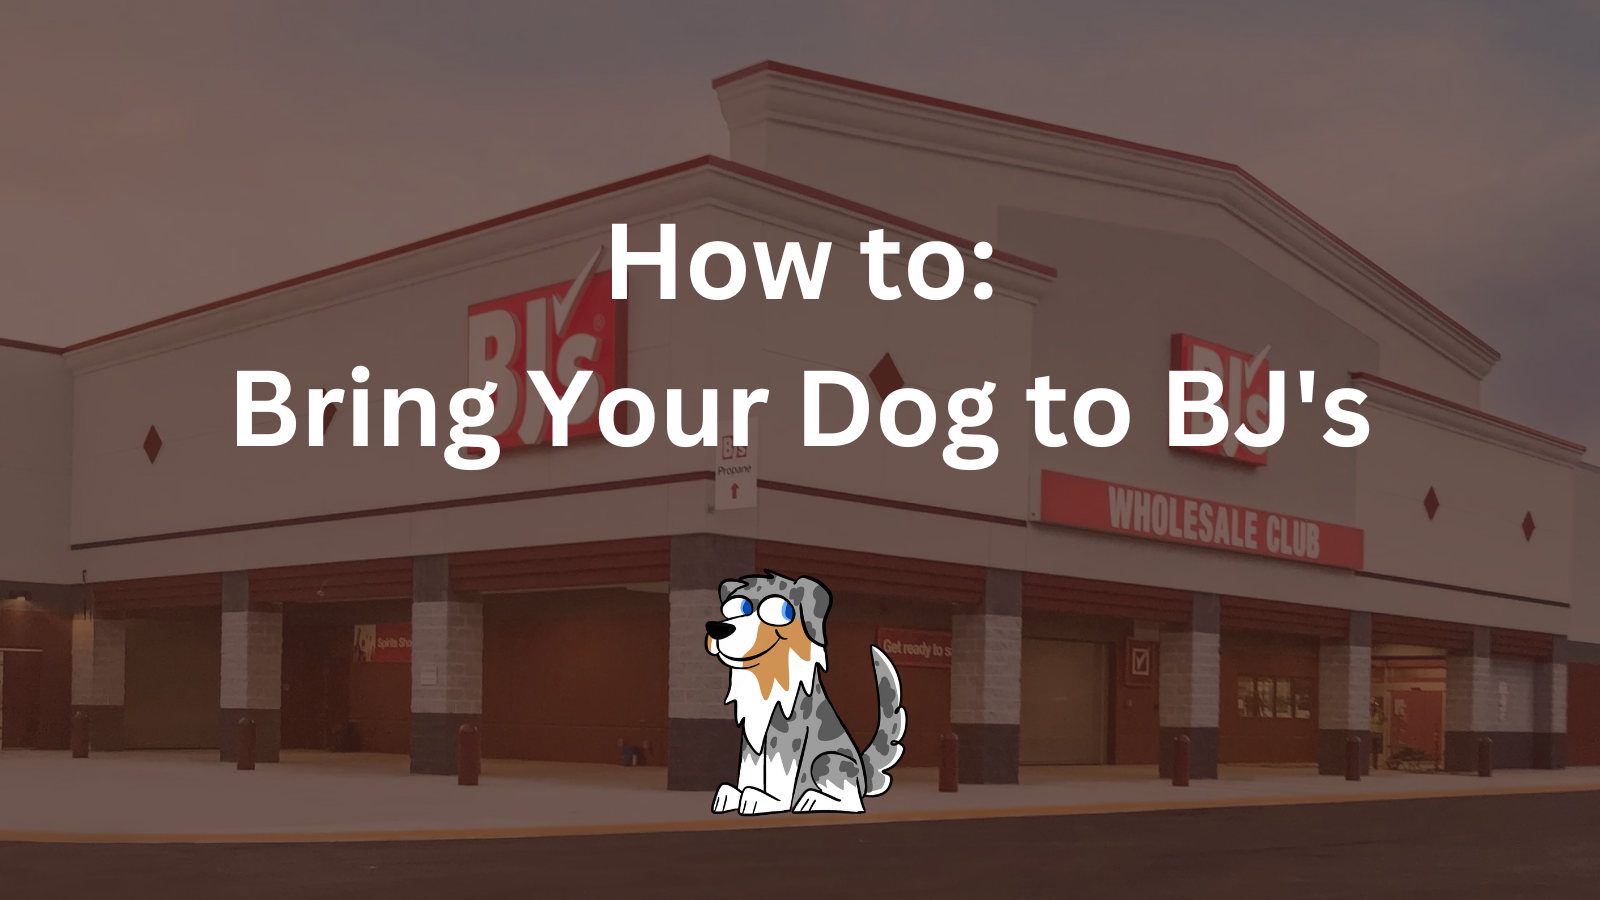 Image Text: "How to Bring Your Dog to BJ's"